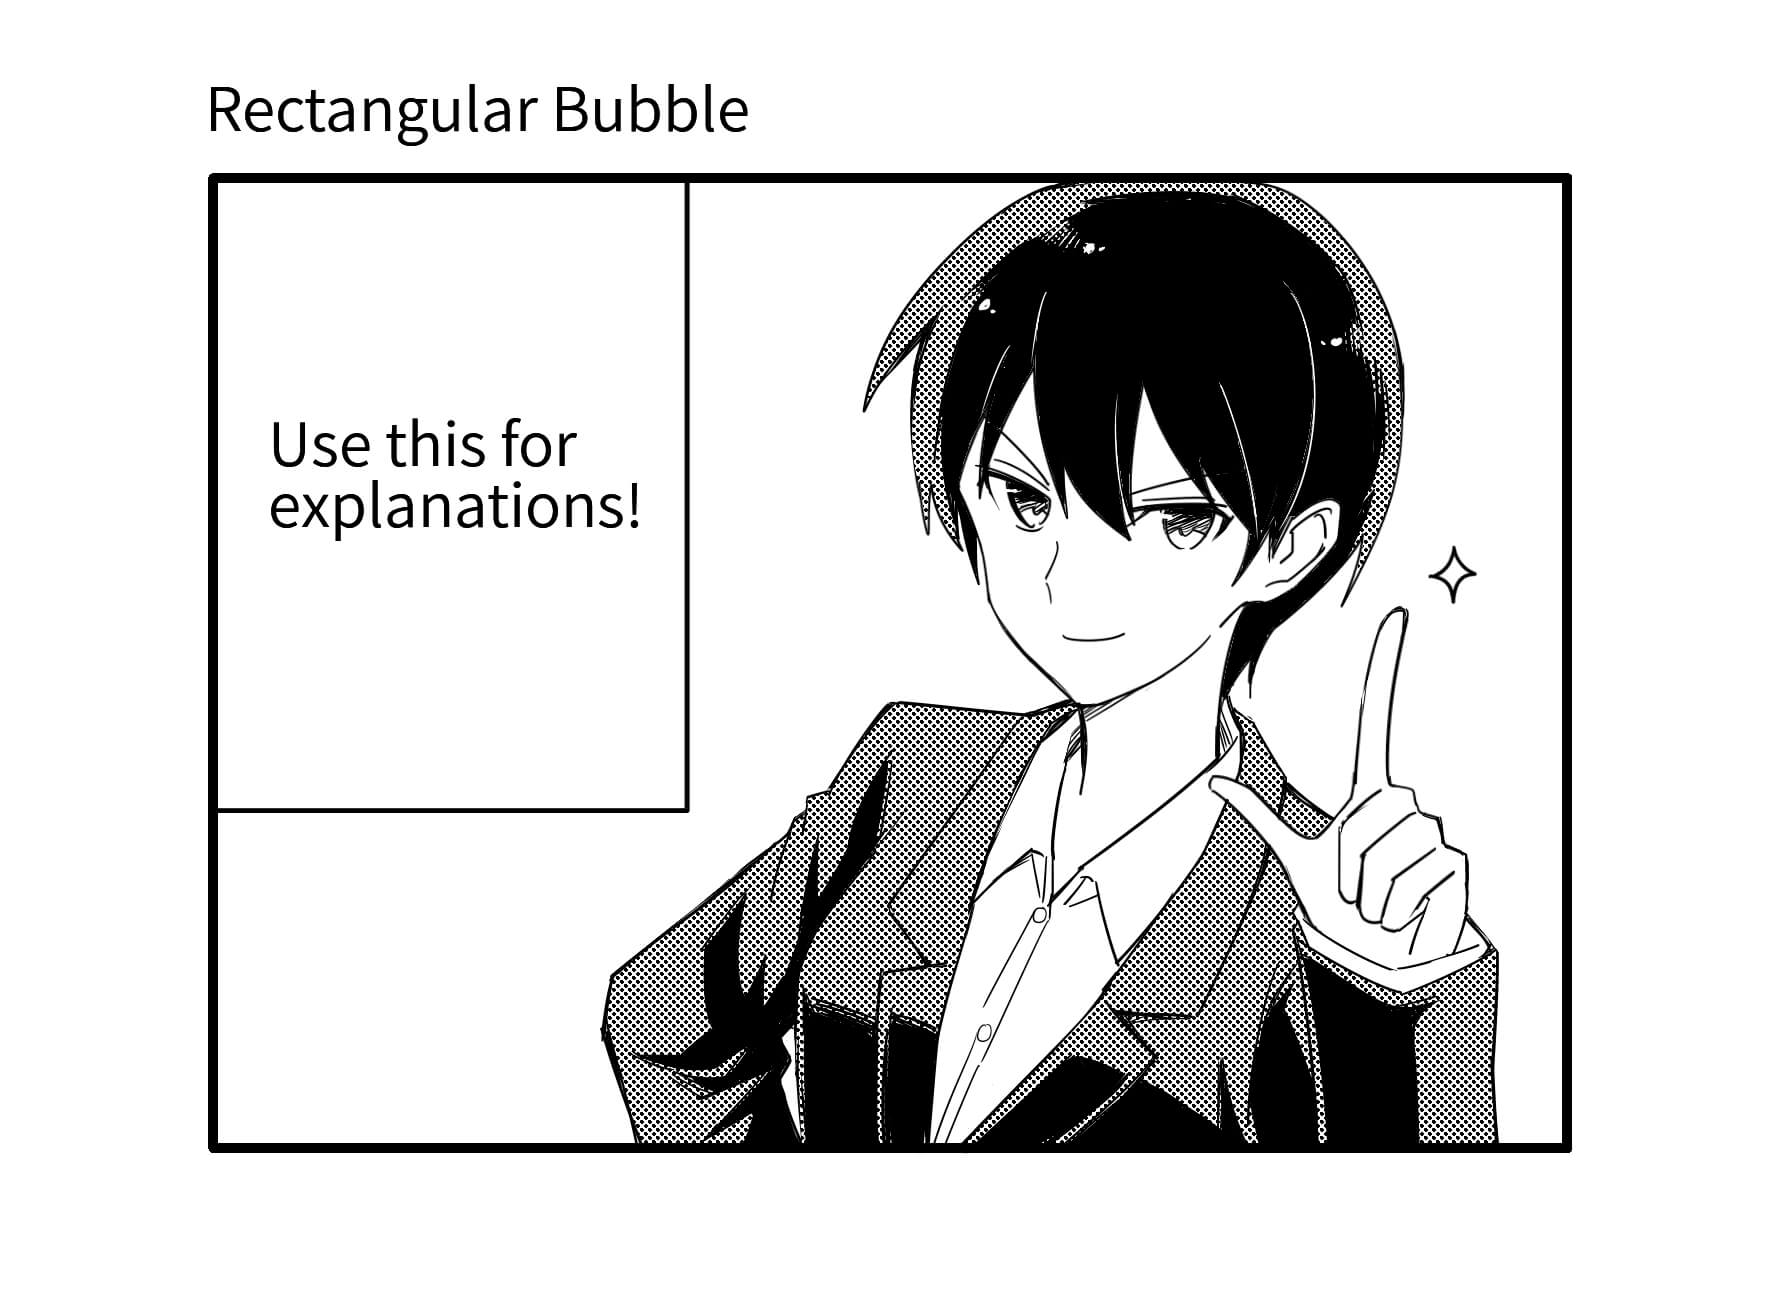 how to get the speech bubbles